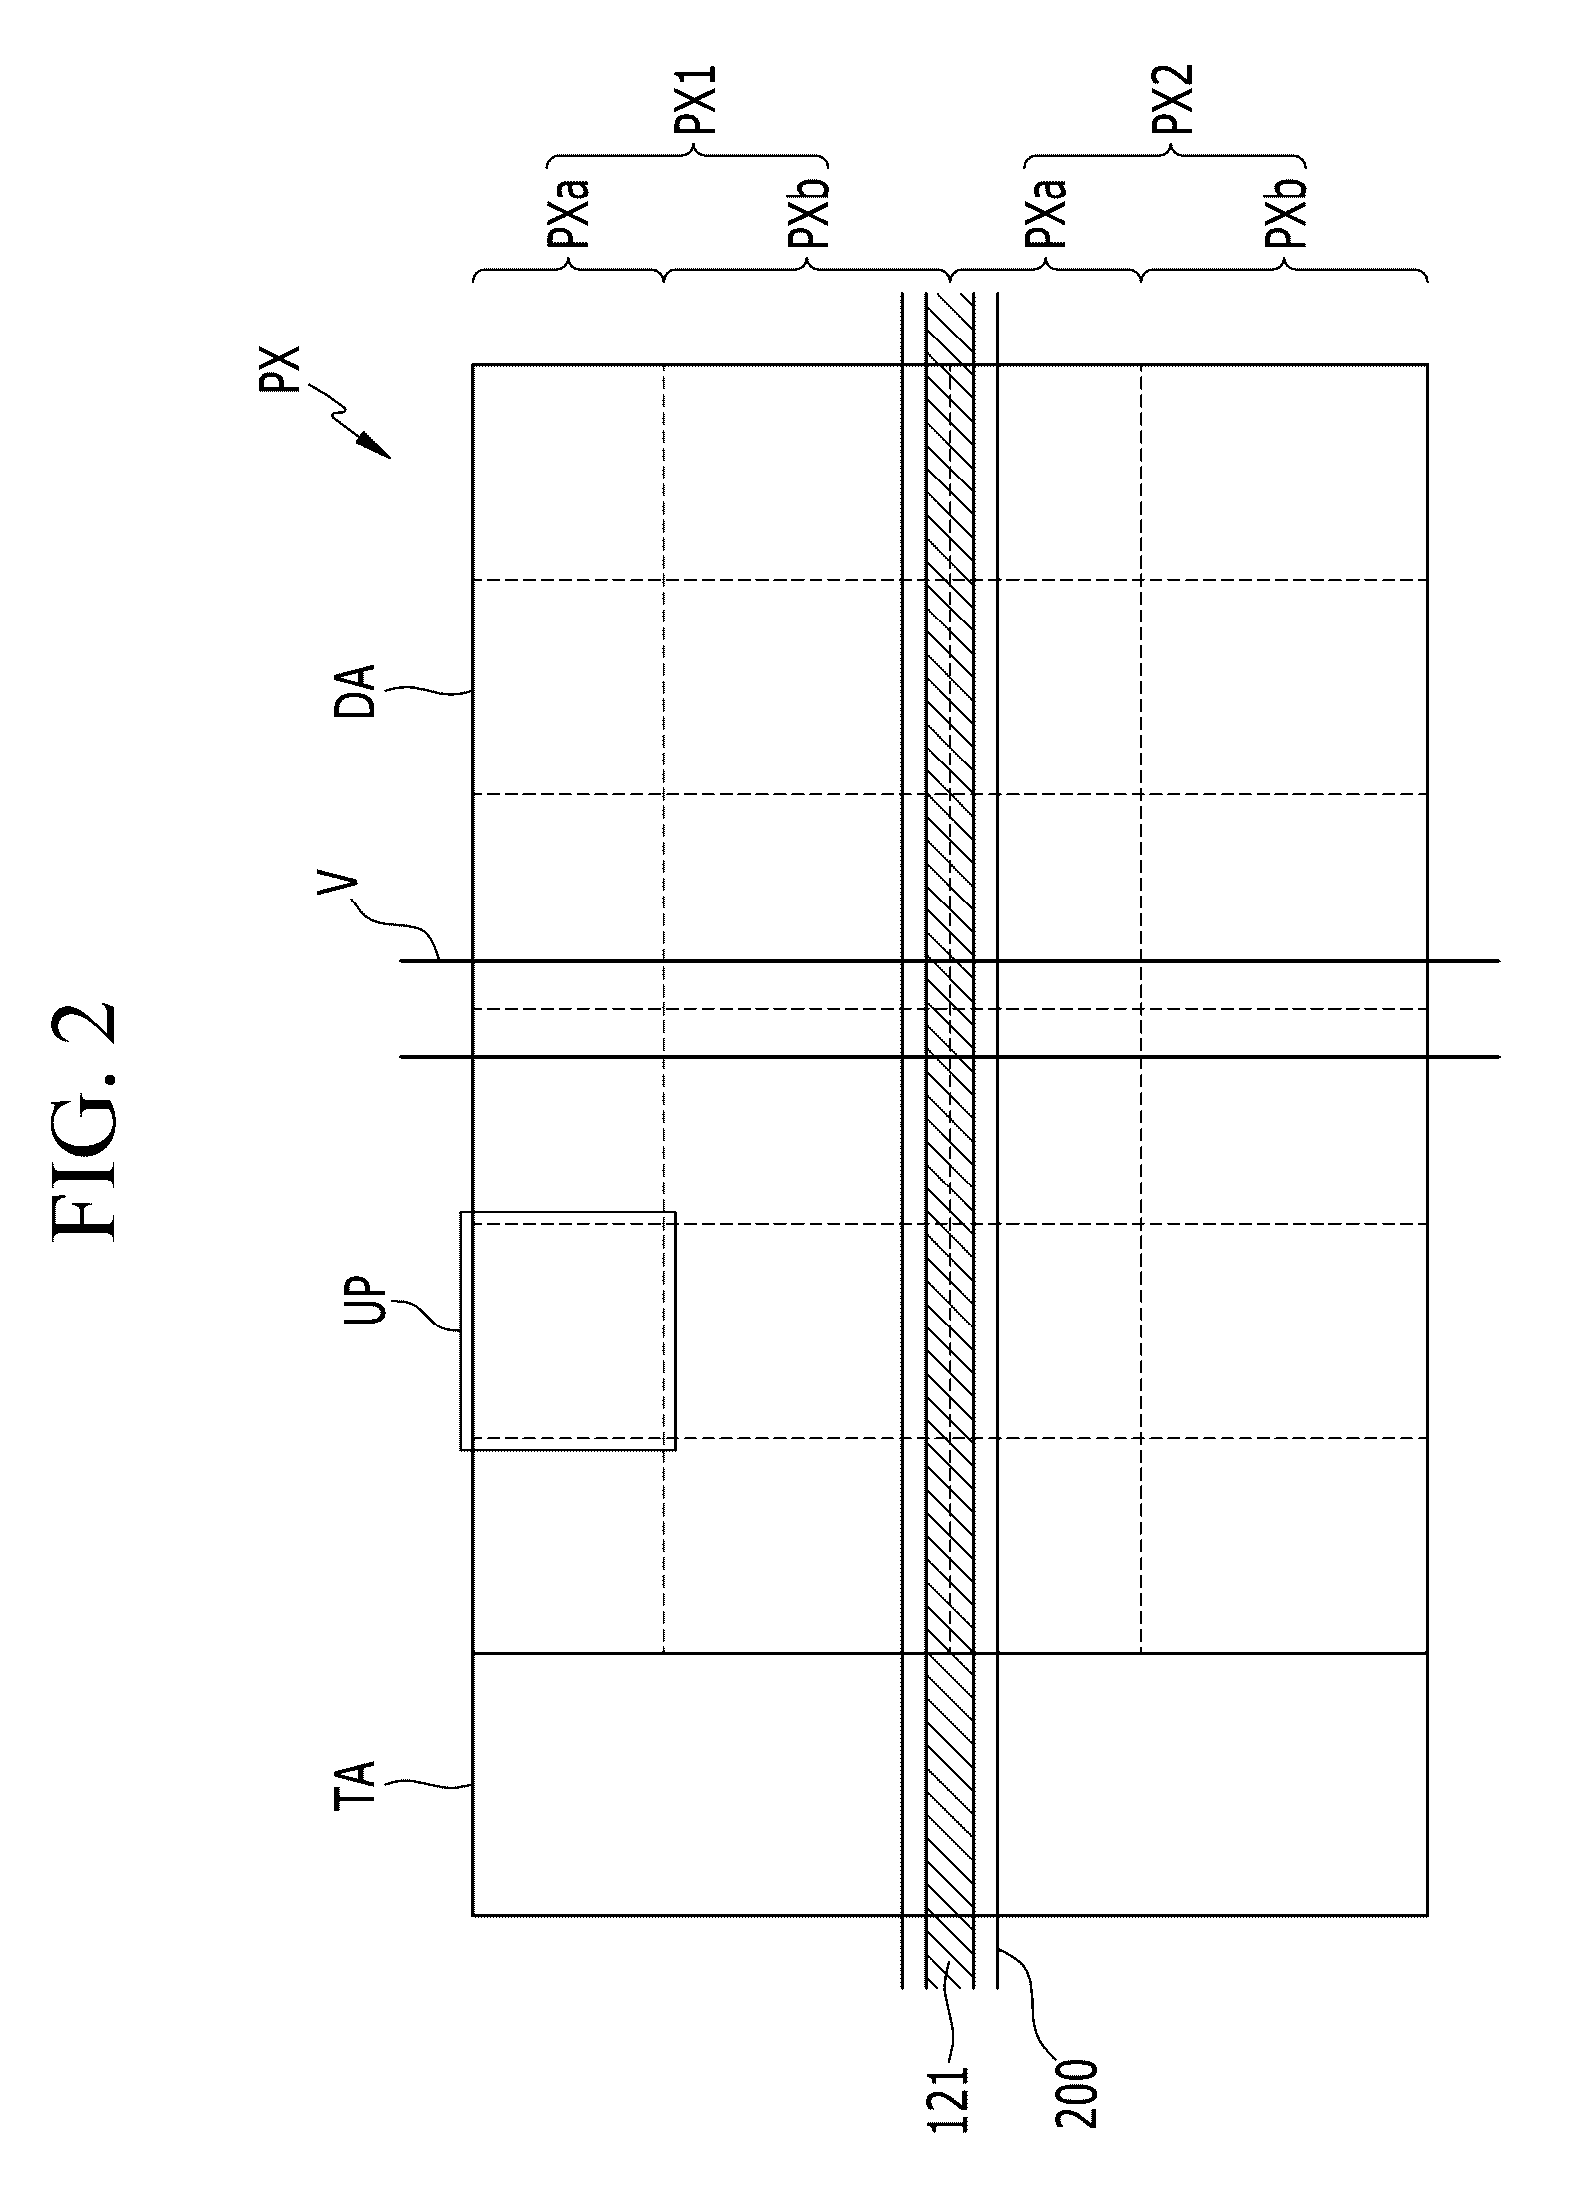 Liquid crystal display including curved shield electrode